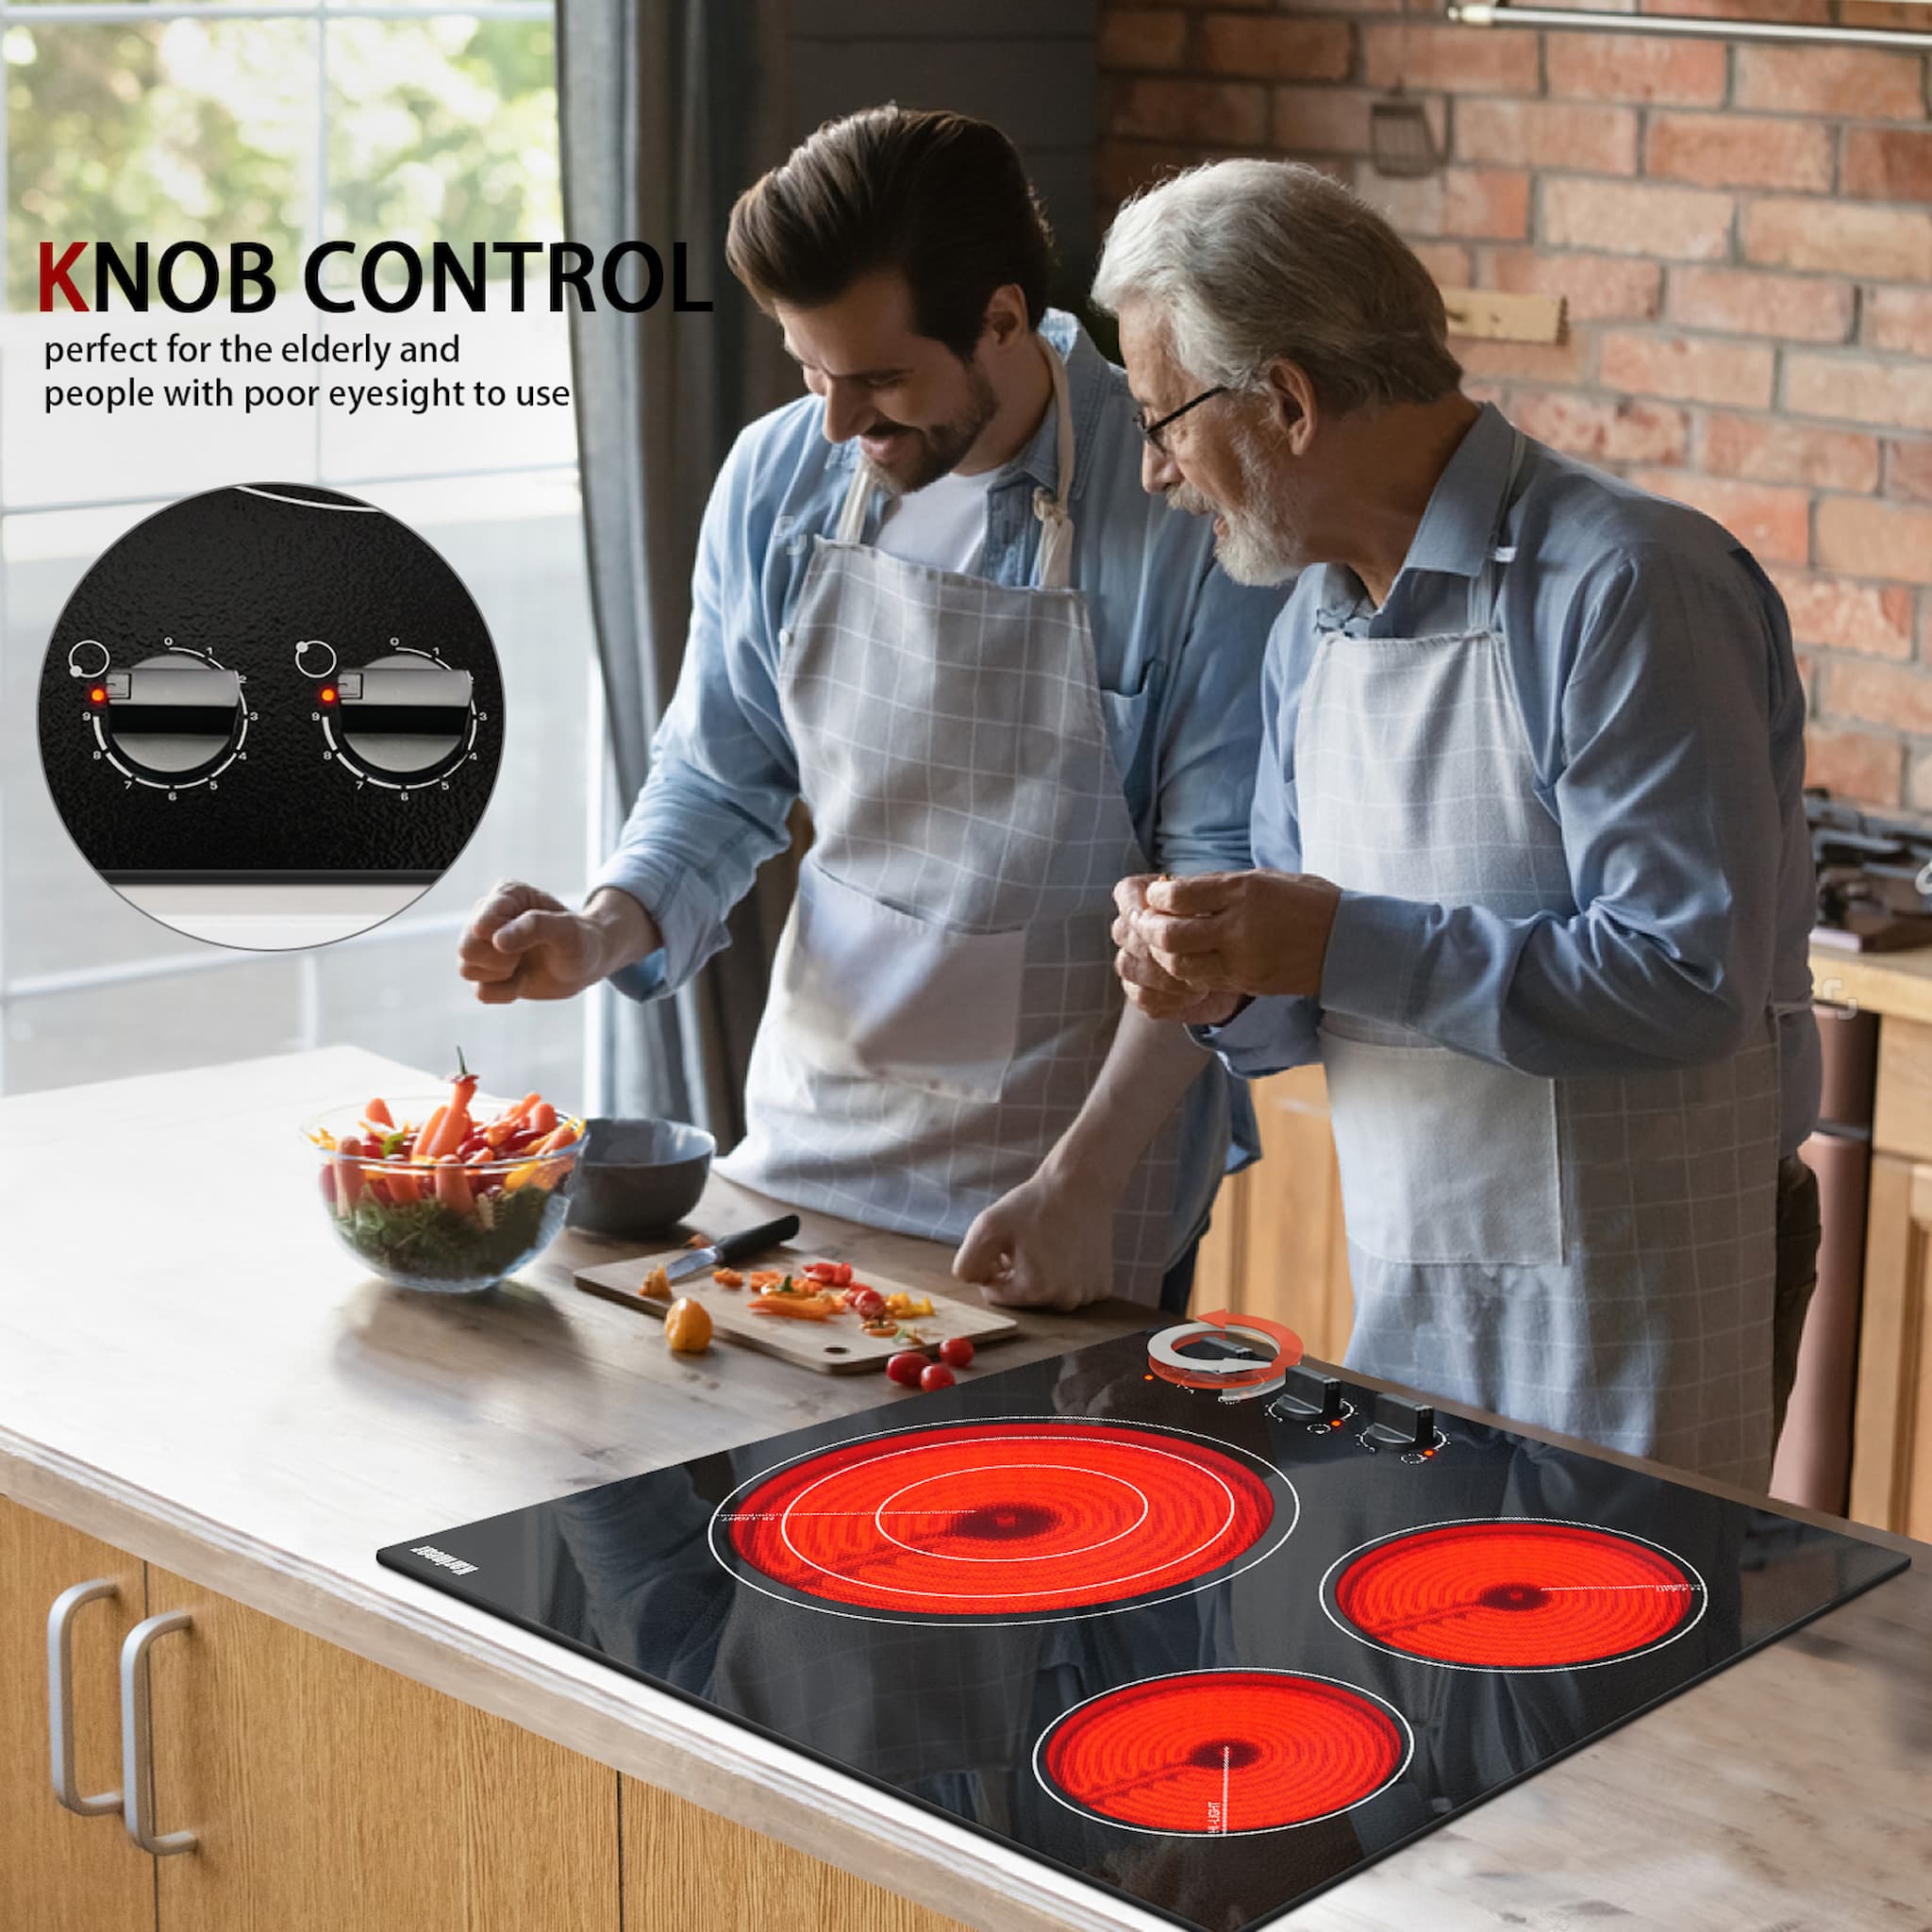 Induction Cooktops vs Electric Cooktops